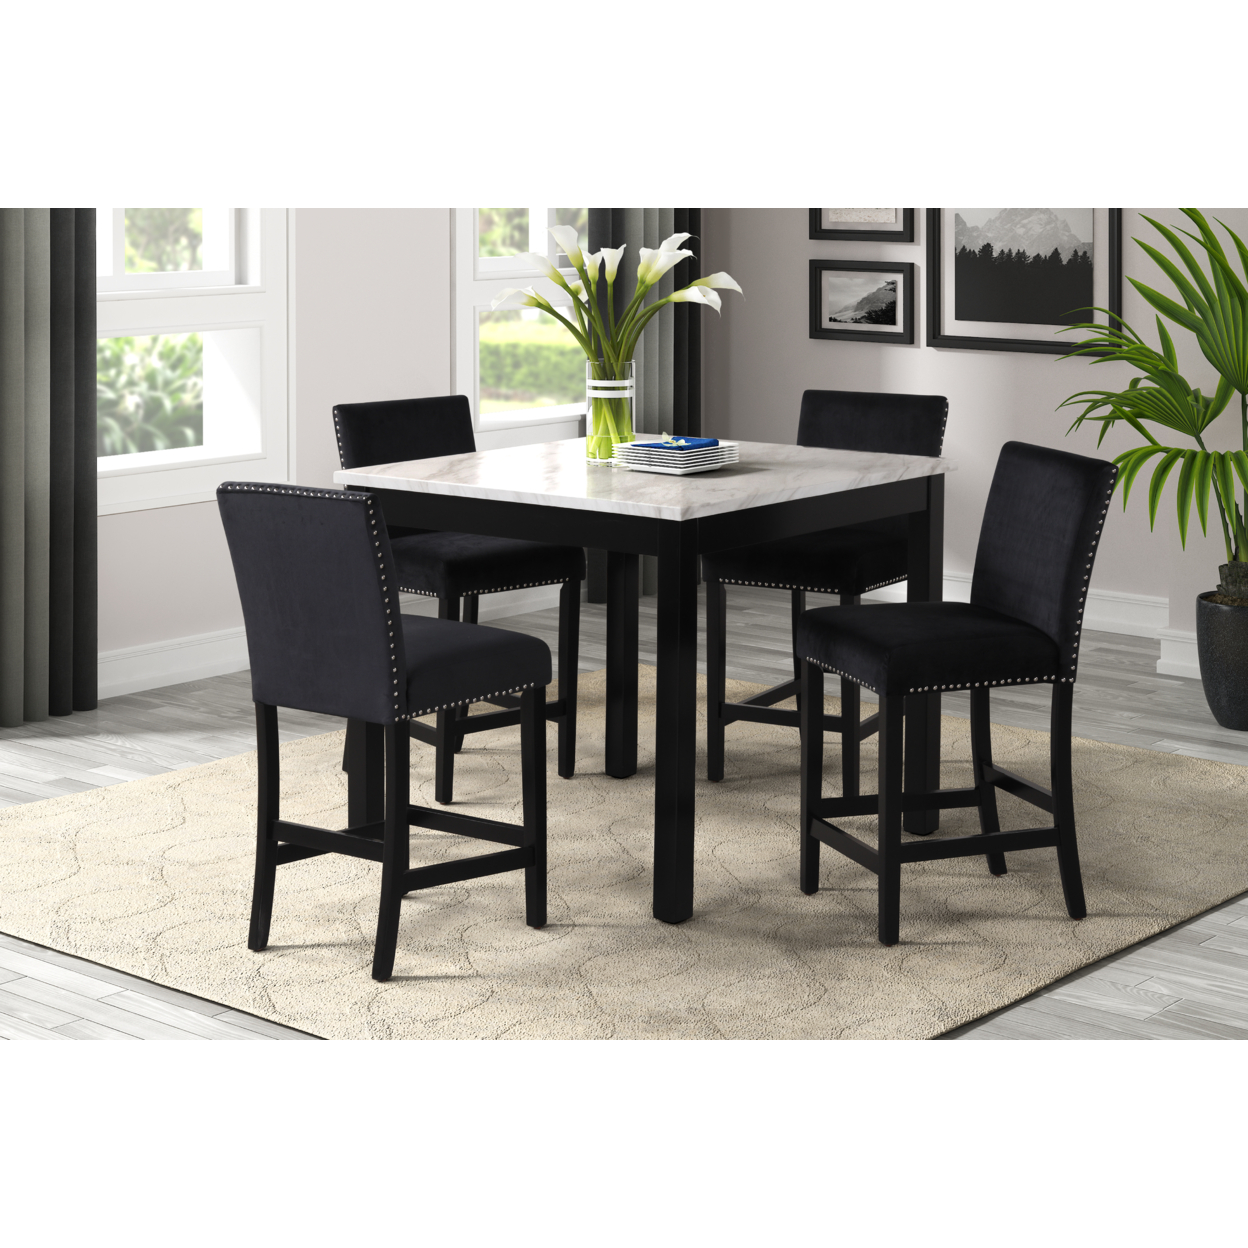 5-piece Counter Height Dining Table Set with One Faux Marble Dining Table and Four Upholstered-Seat Chairsï¿½ï¿½ for Kitchen and Living room